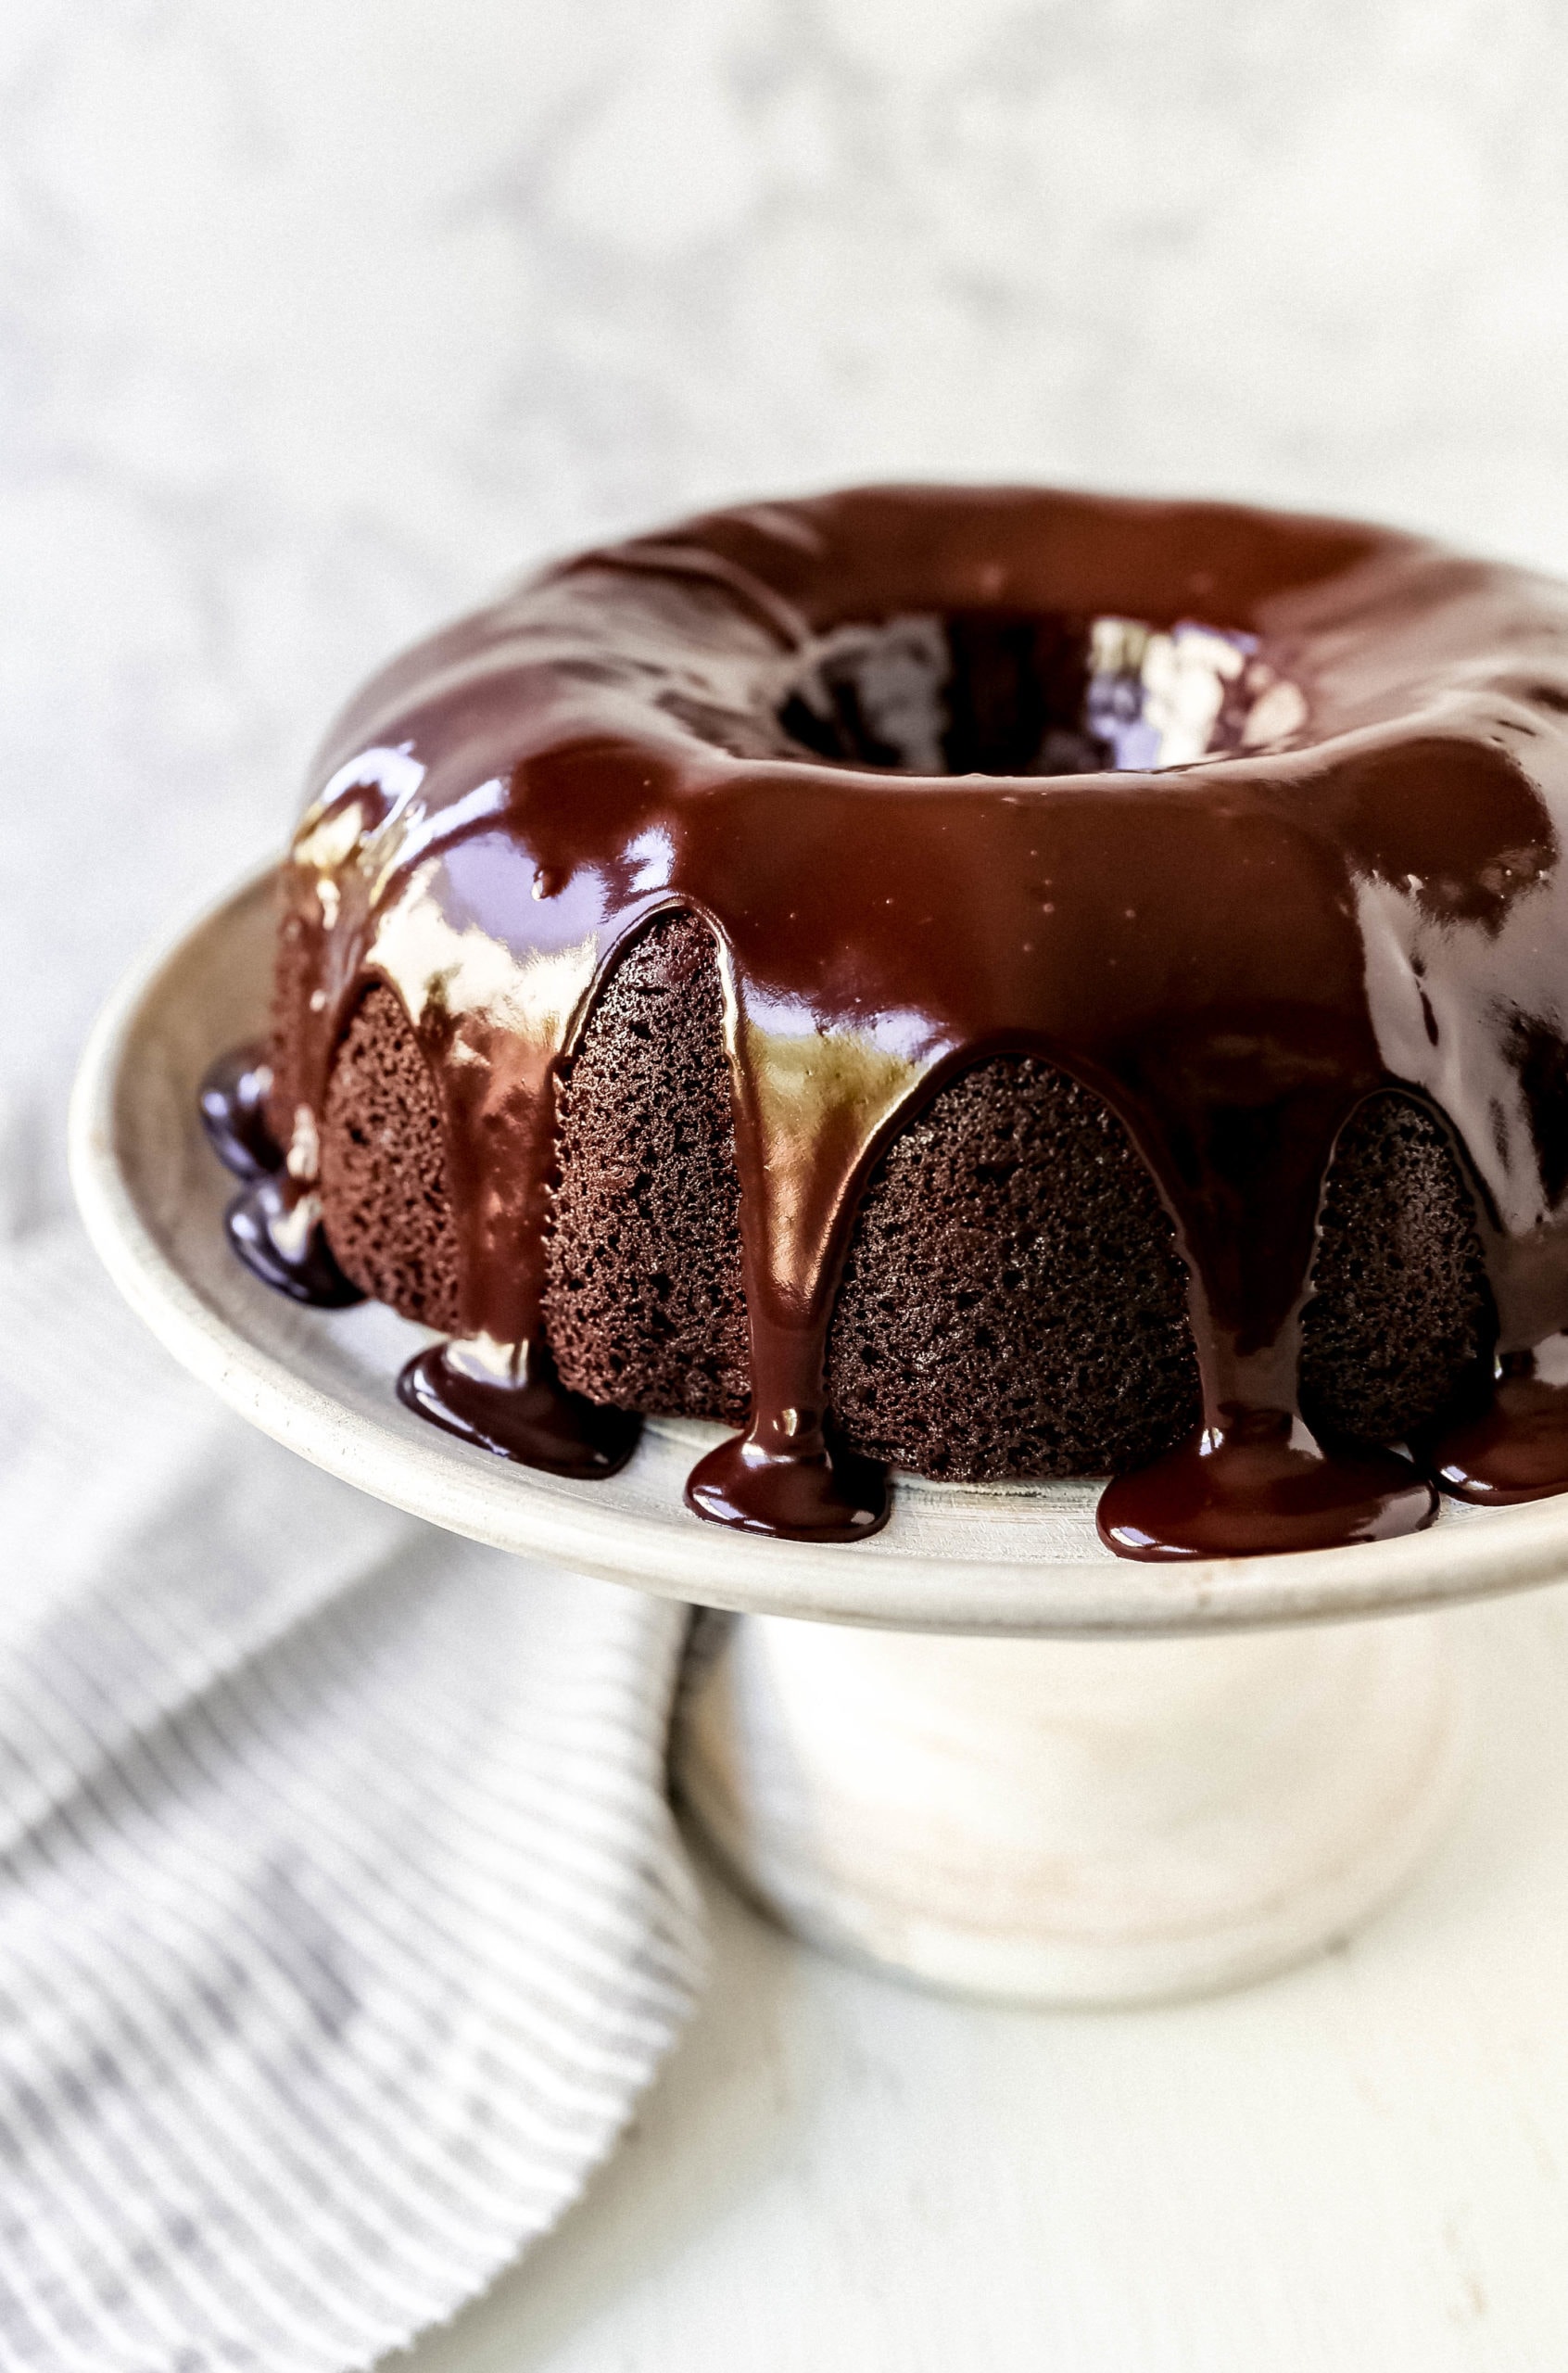 The Best Chocolate Bundt Cake Moist, decadent, rich chocolate bundt cake with a silky chocolate glaze. How to make the perfect chocolate bundt cake recipe! #chocolate #bundtcake #chocolatebundtcake #chocolatecake #cake